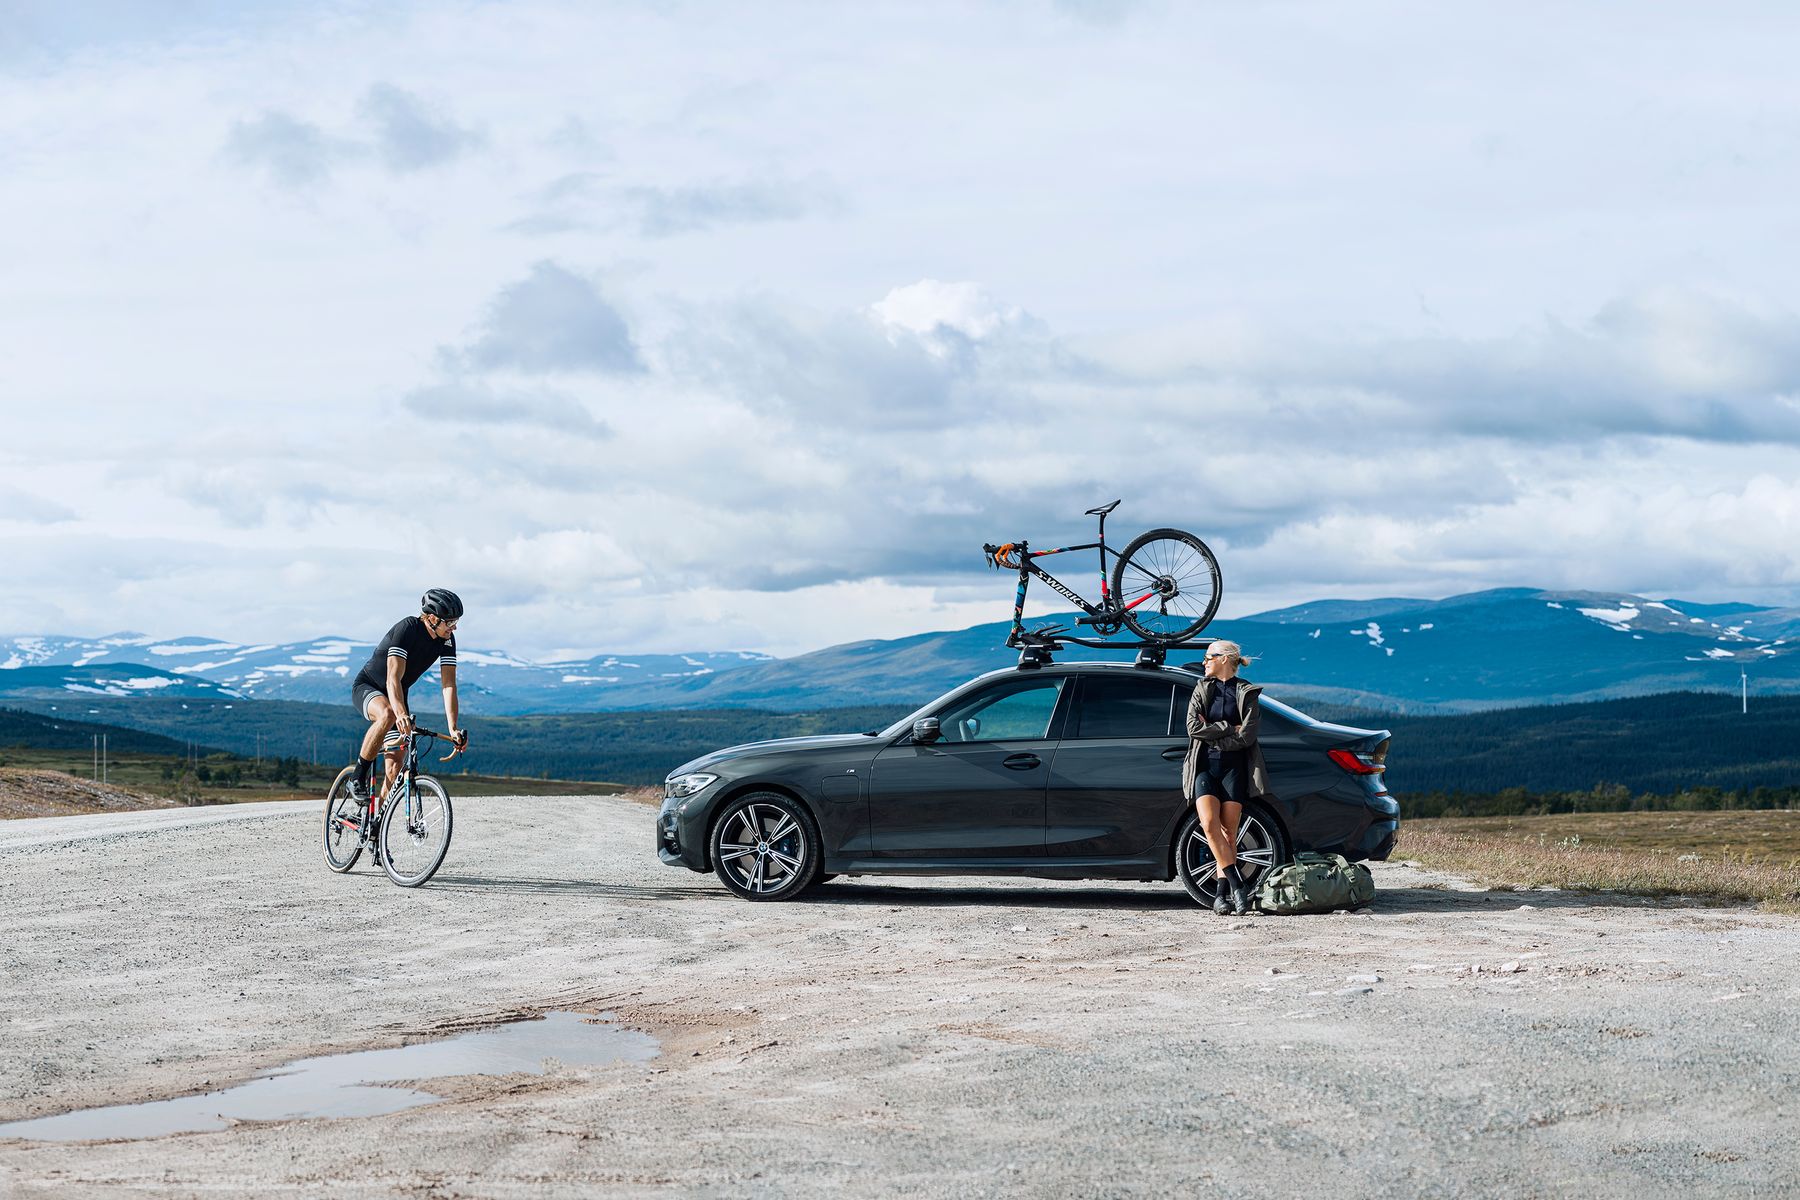 Thule TopRide lifestyle activity